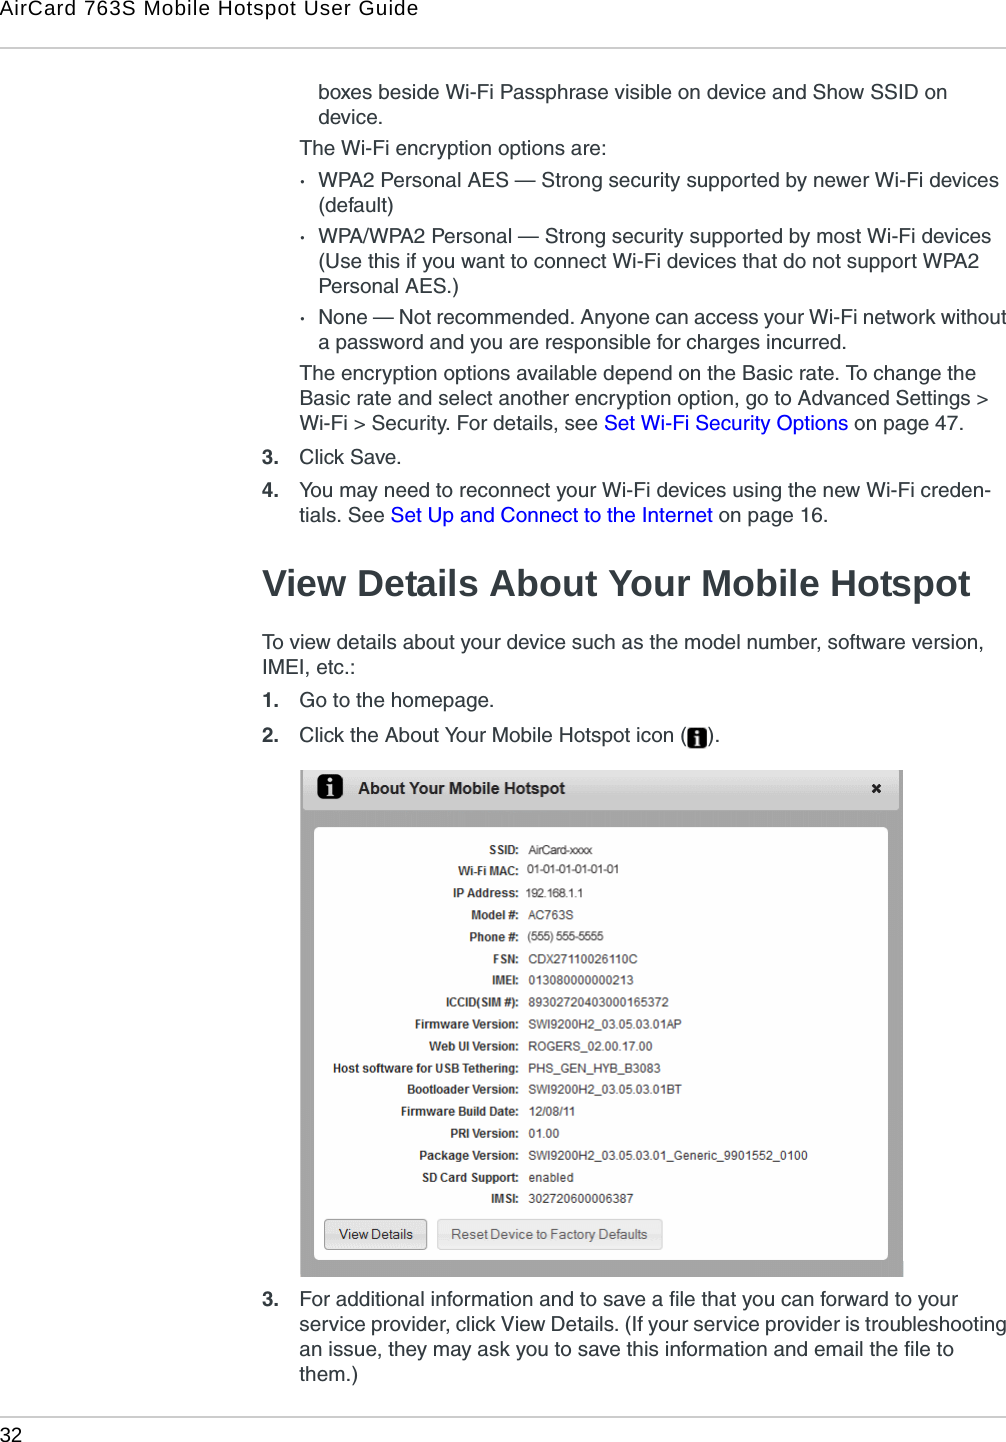 AirCard 763S Mobile Hotspot User Guide32  boxes beside Wi-Fi Passphrase visible on device and Show SSID on device.The Wi-Fi encryption options are:·WPA2 Personal AES — Strong security supported by newer Wi-Fi devices (default) ·WPA/WPA2 Personal — Strong security supported by most Wi-Fi devices (Use this if you want to connect Wi-Fi devices that do not support WPA2 Personal AES.)·None — Not recommended. Anyone can access your Wi-Fi network without a password and you are responsible for charges incurred. The encryption options available depend on the Basic rate. To change the Basic rate and select another encryption option, go to Advanced Settings &gt; Wi-Fi &gt; Security. For details, see Set Wi-Fi Security Options on page 47.3. Click Save. 4. You may need to reconnect your Wi-Fi devices using the new Wi-Fi creden-tials. See Set Up and Connect to the Internet on page 16.View Details About Your Mobile HotspotTo view details about your device such as the model number, software version, IMEI, etc.:1. Go to the homepage.2. Click the About Your Mobile Hotspot icon ( ).3. For additional information and to save a file that you can forward to your service provider, click View Details. (If your service provider is troubleshooting an issue, they may ask you to save this information and email the file to them.)